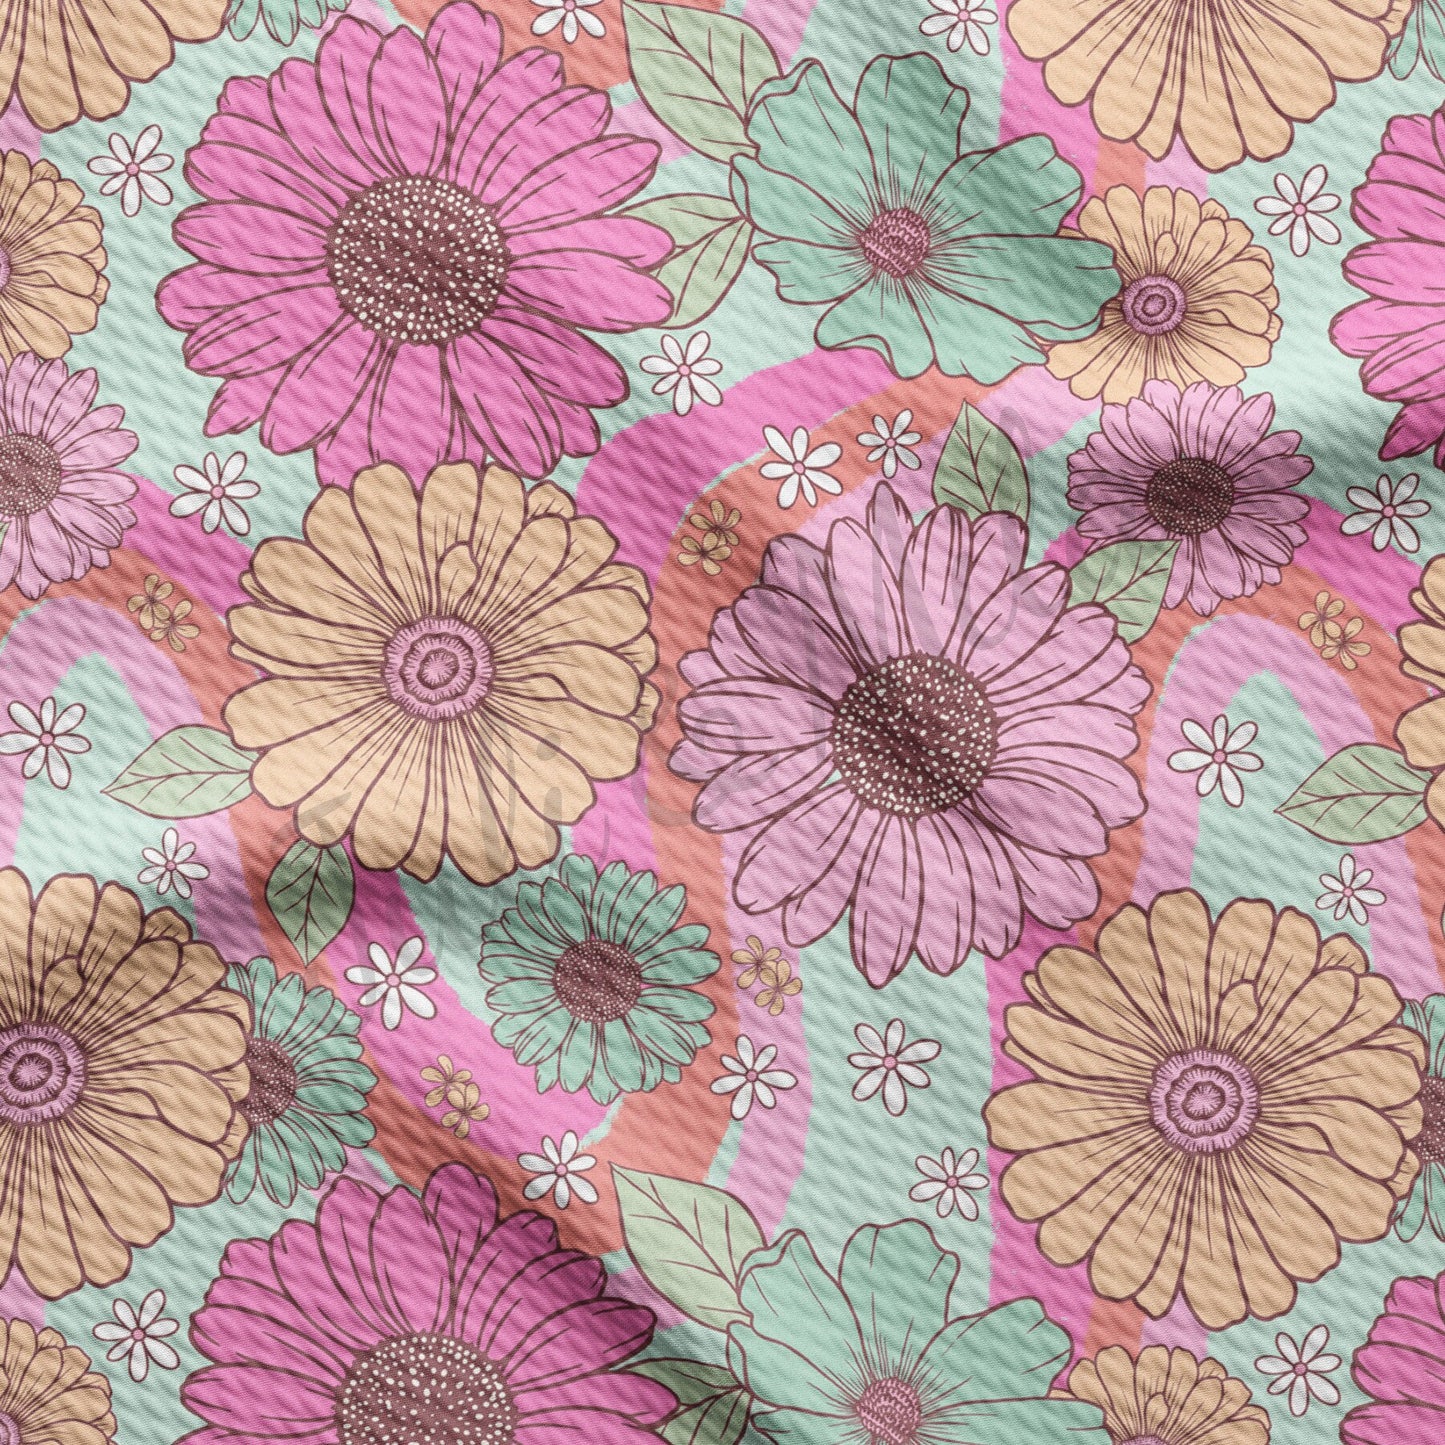 Floral  Bullet Textured Fabric by the yard AA1607